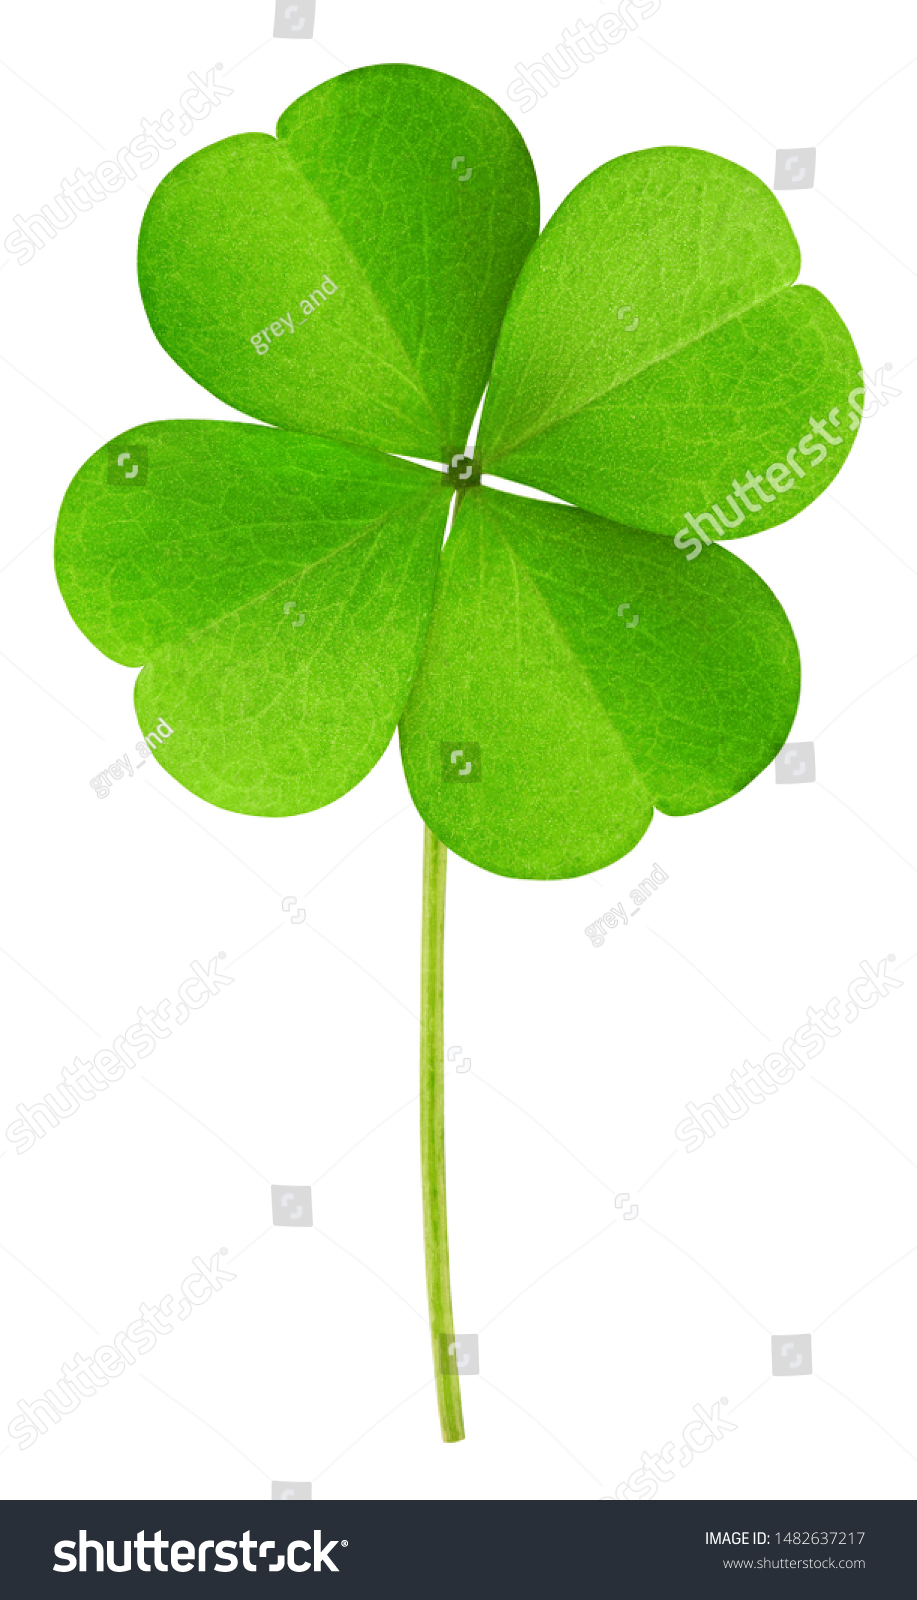 clover isolated on white background, clipping path, full depth of field #1482637217